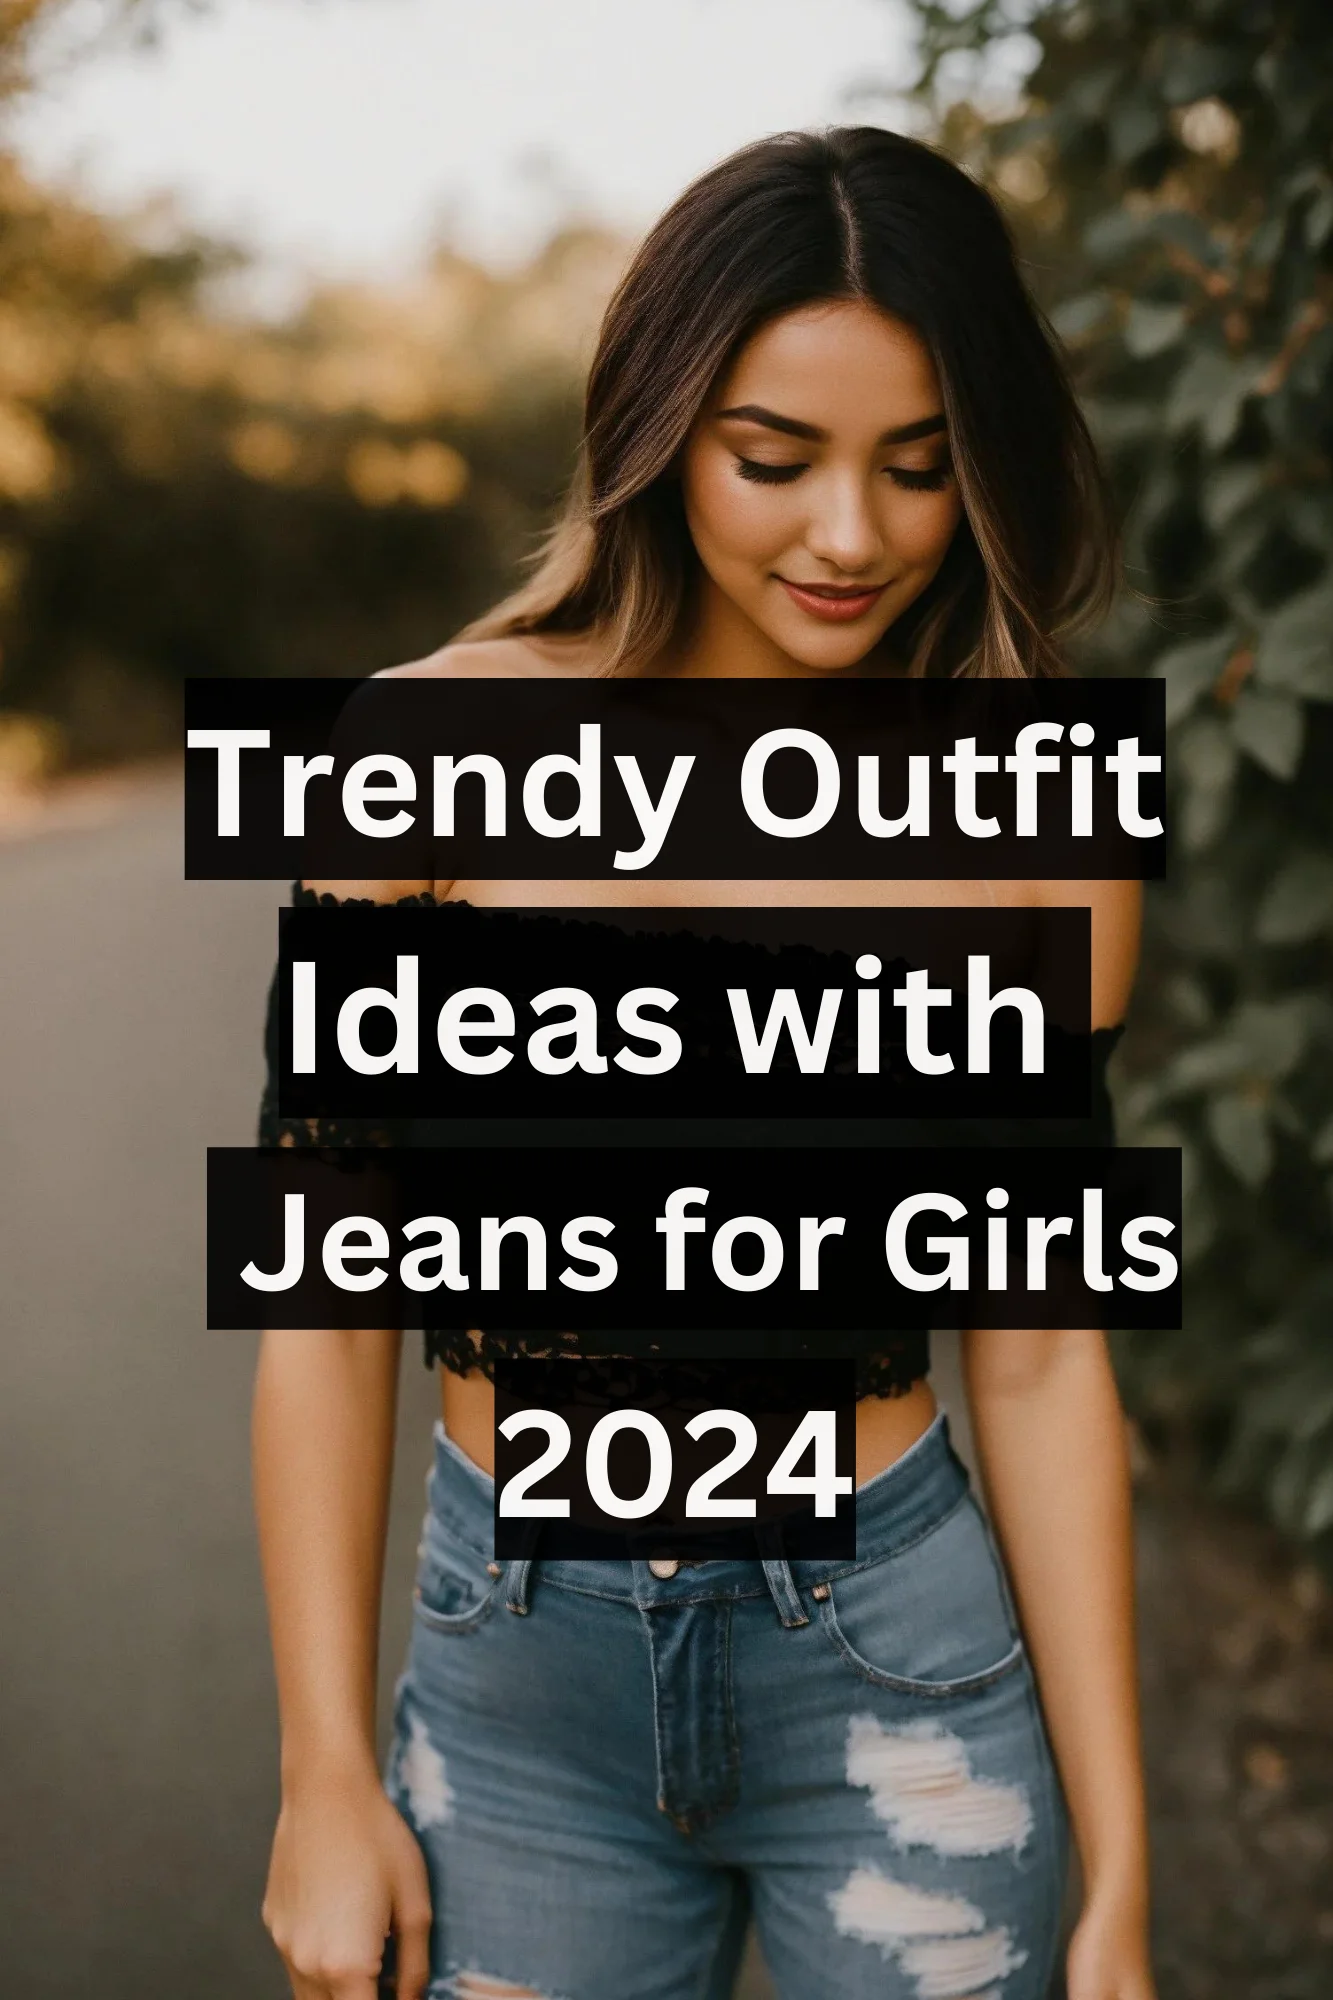 Trendy New outfits for Womens over 40 4